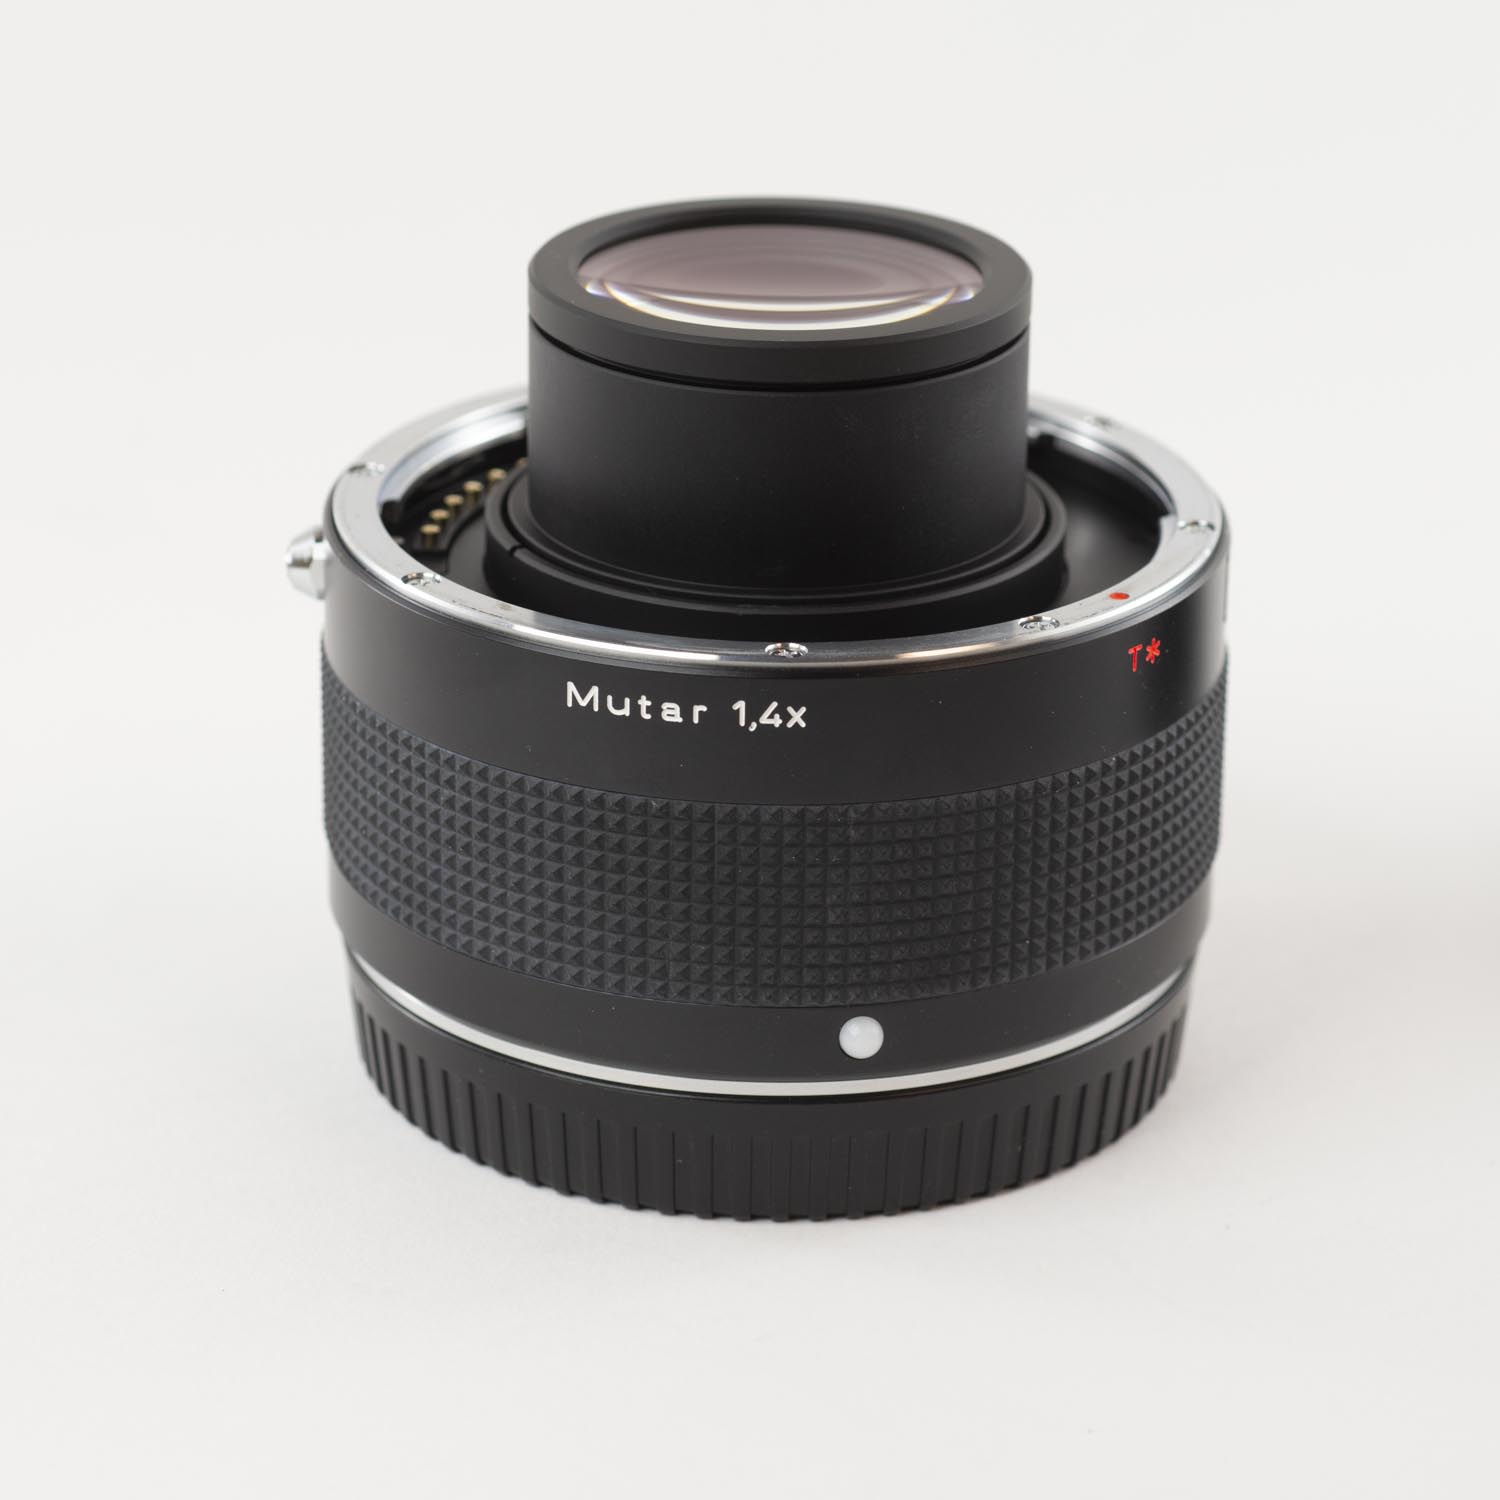 Carl Zeiss Mutar T* 1.4x for Contax 645 Camtec Photo